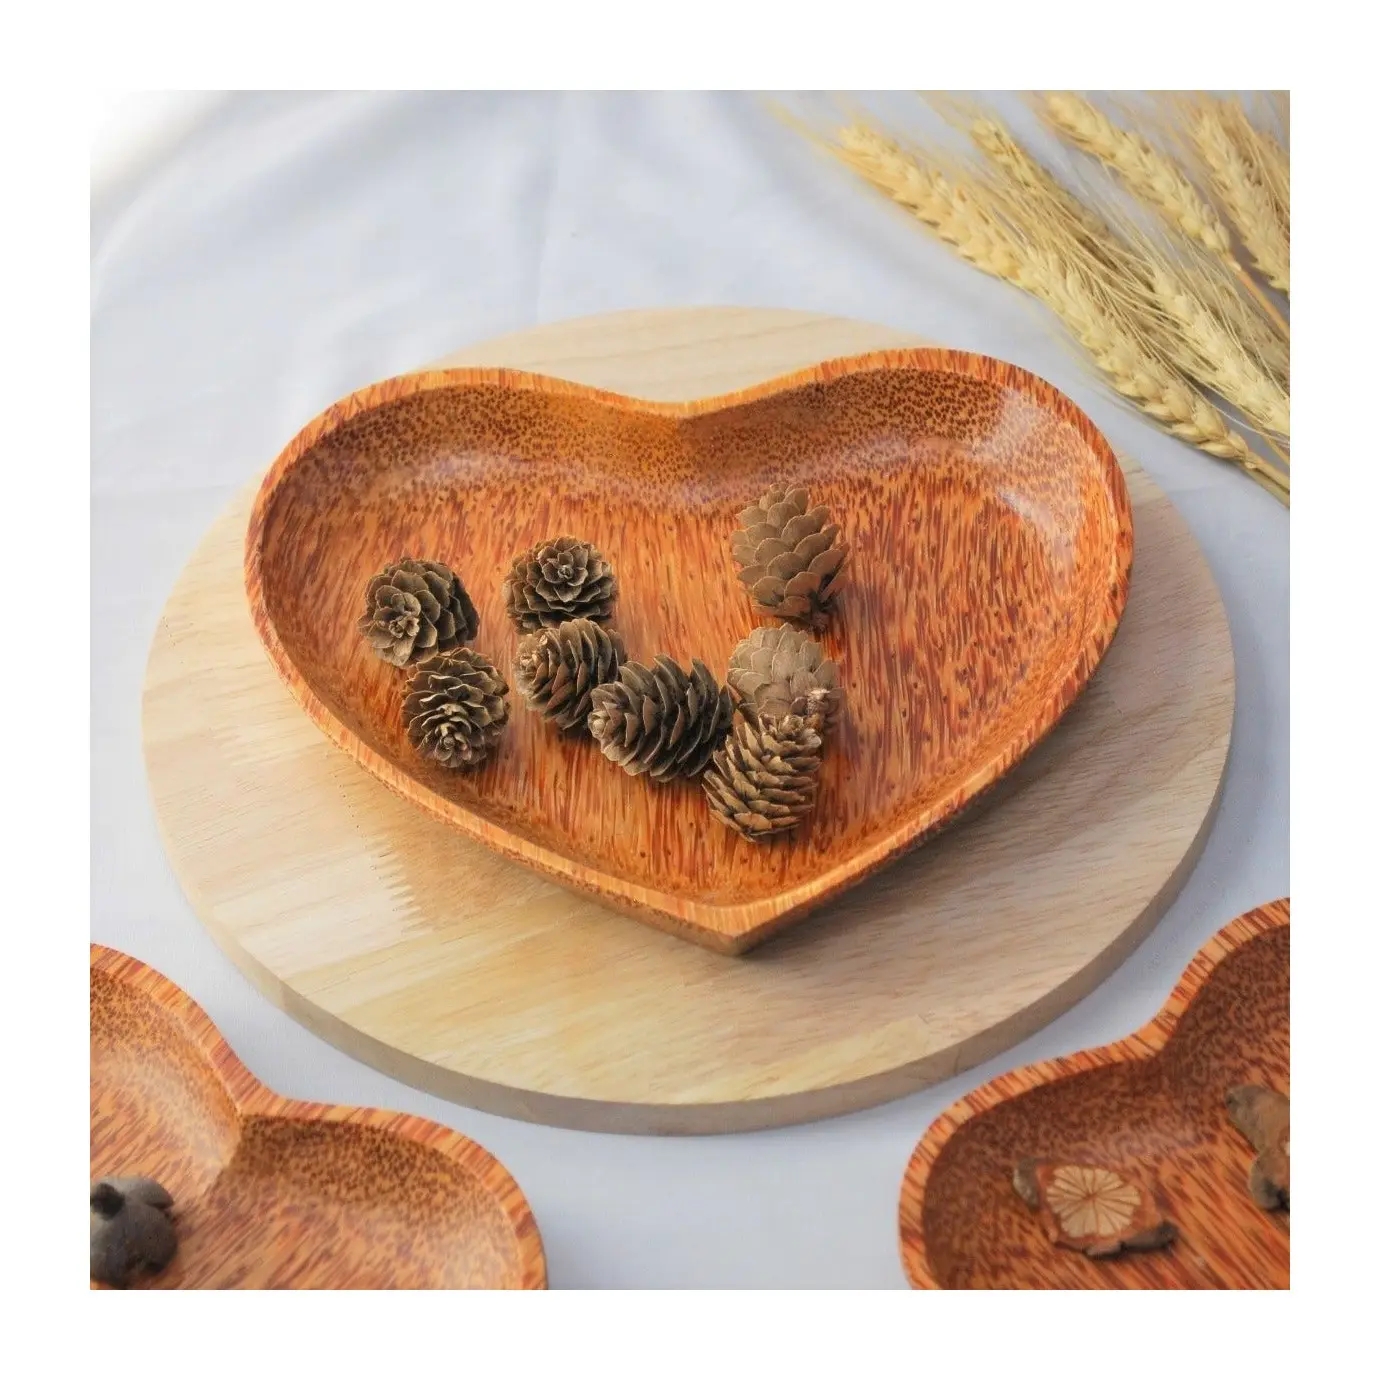 Camping biodegradable dinnerware sets dinner serving heart shaped plates coconut wood dining plate set wholesale